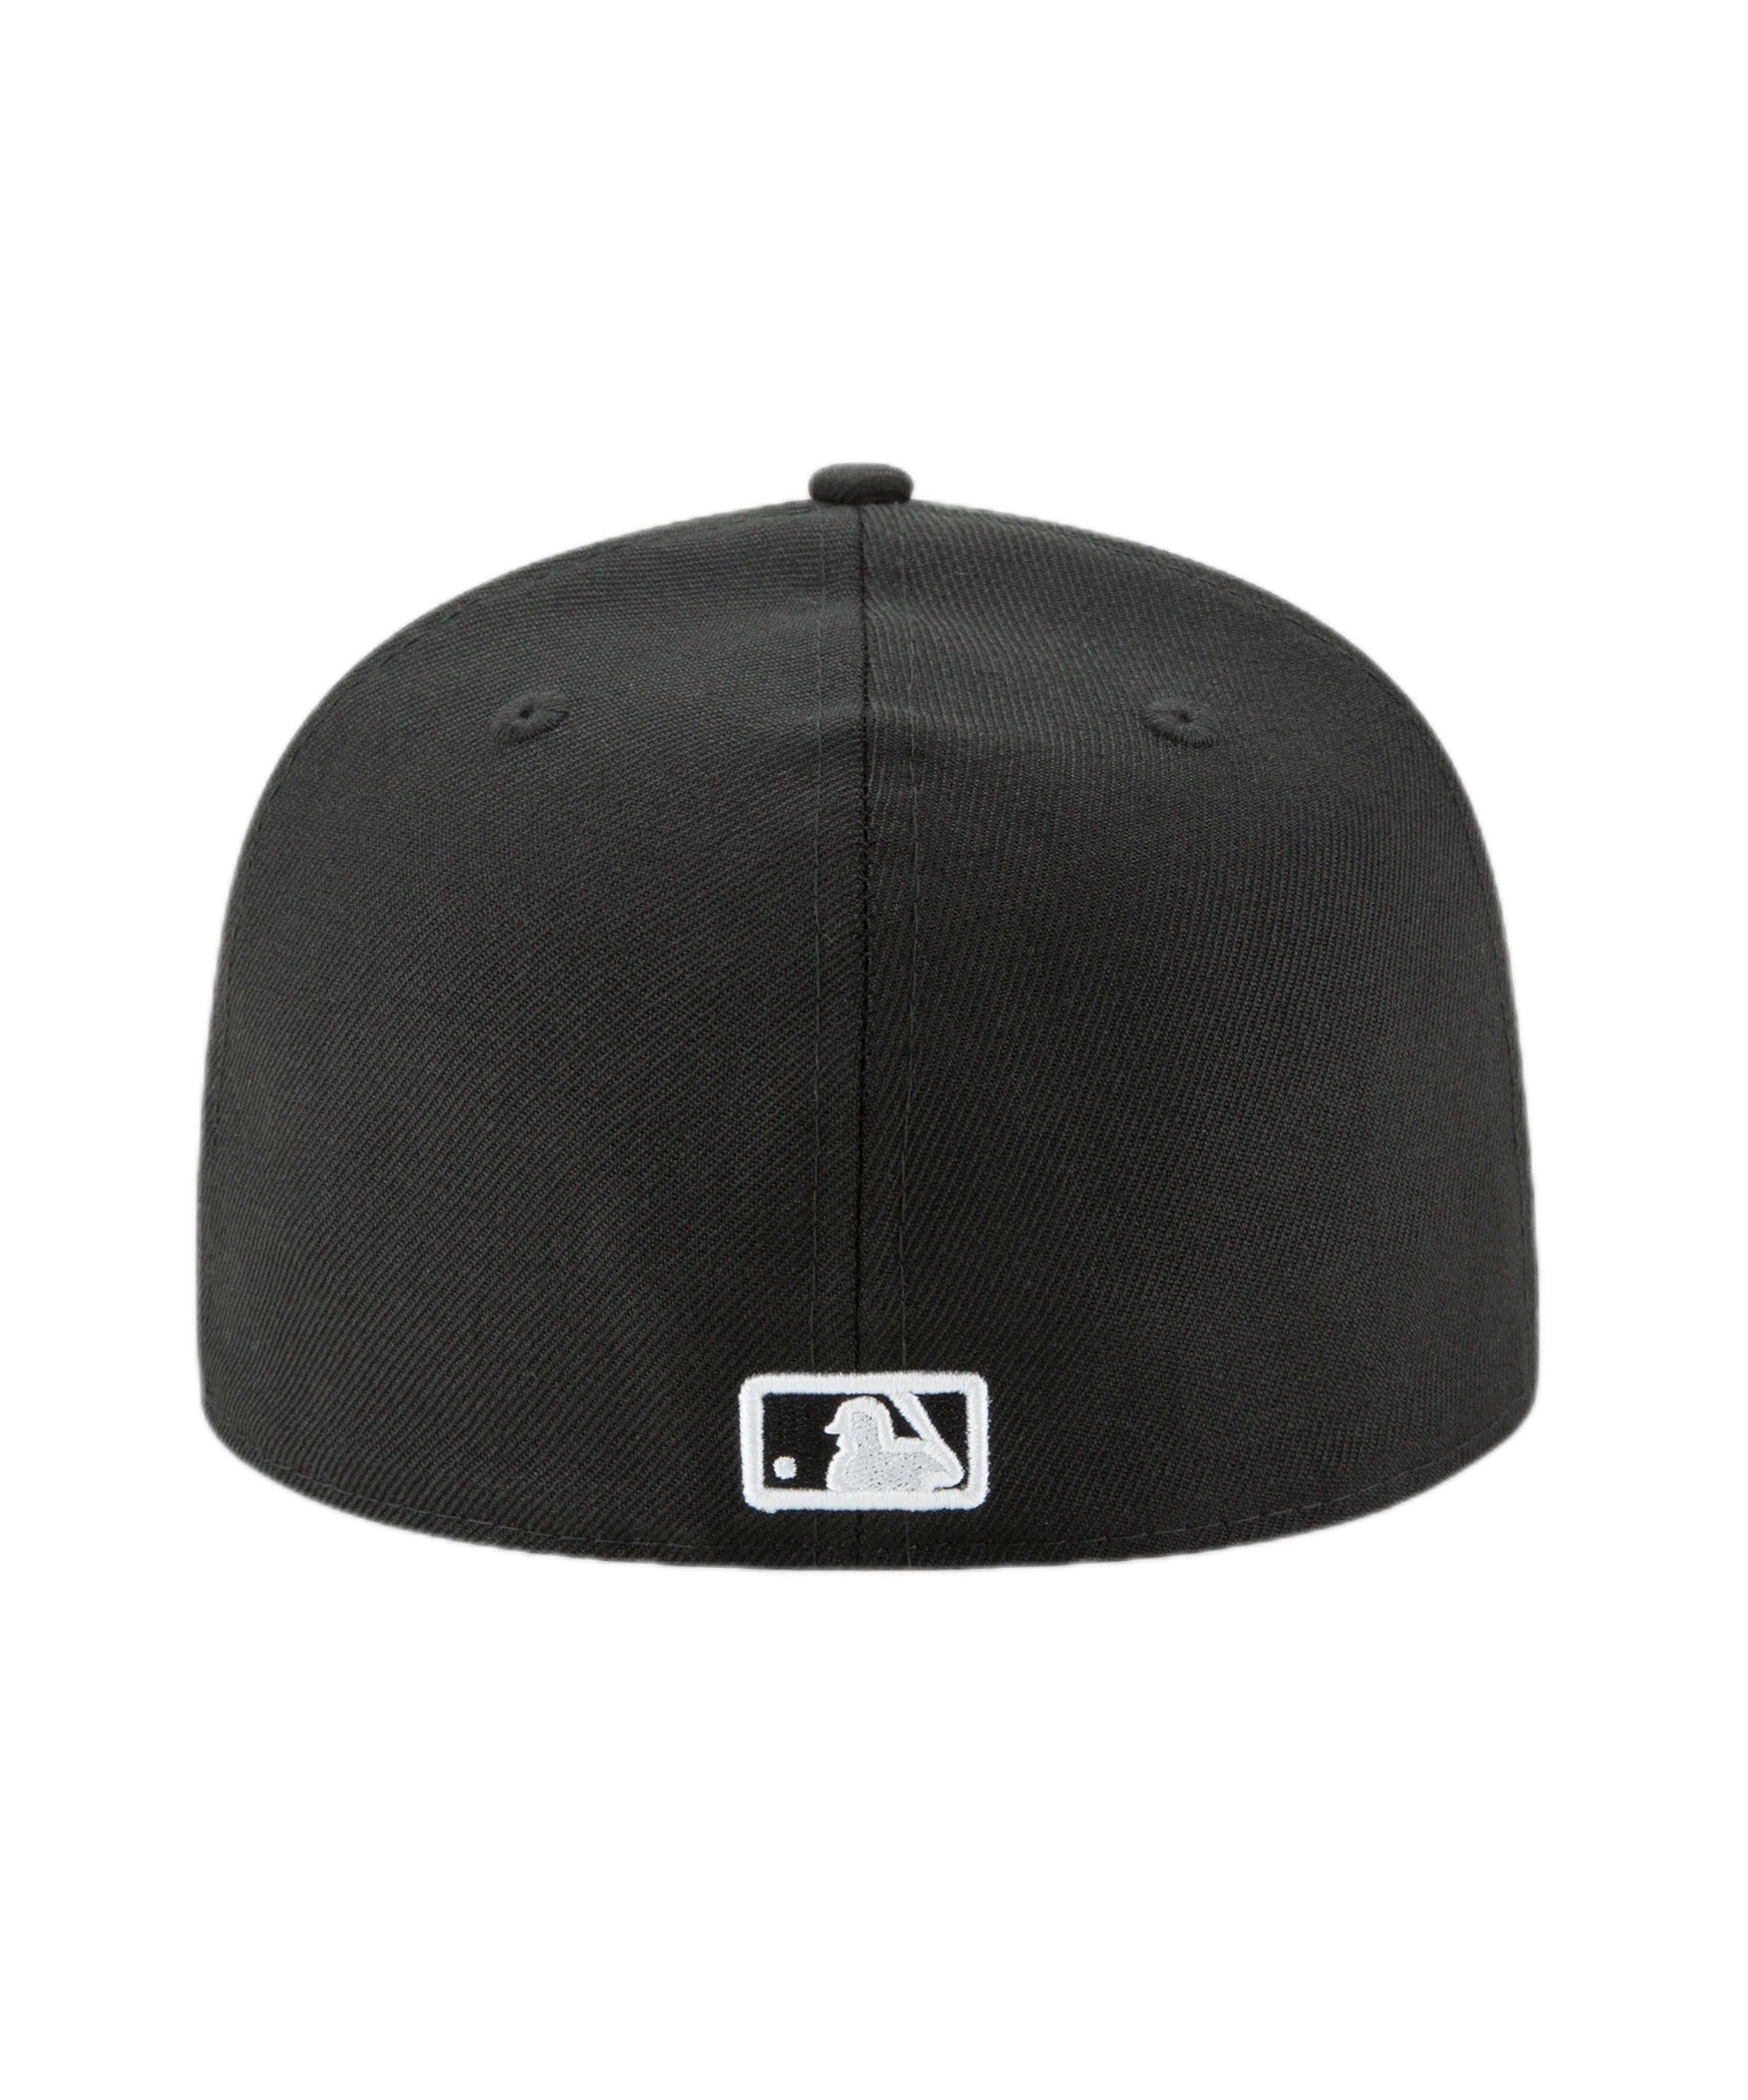 PAPER PLANES NEW YORK YANKEES (MLB X PAPER PLANES) "LIMITED" (GREEN UNDER VISOR)